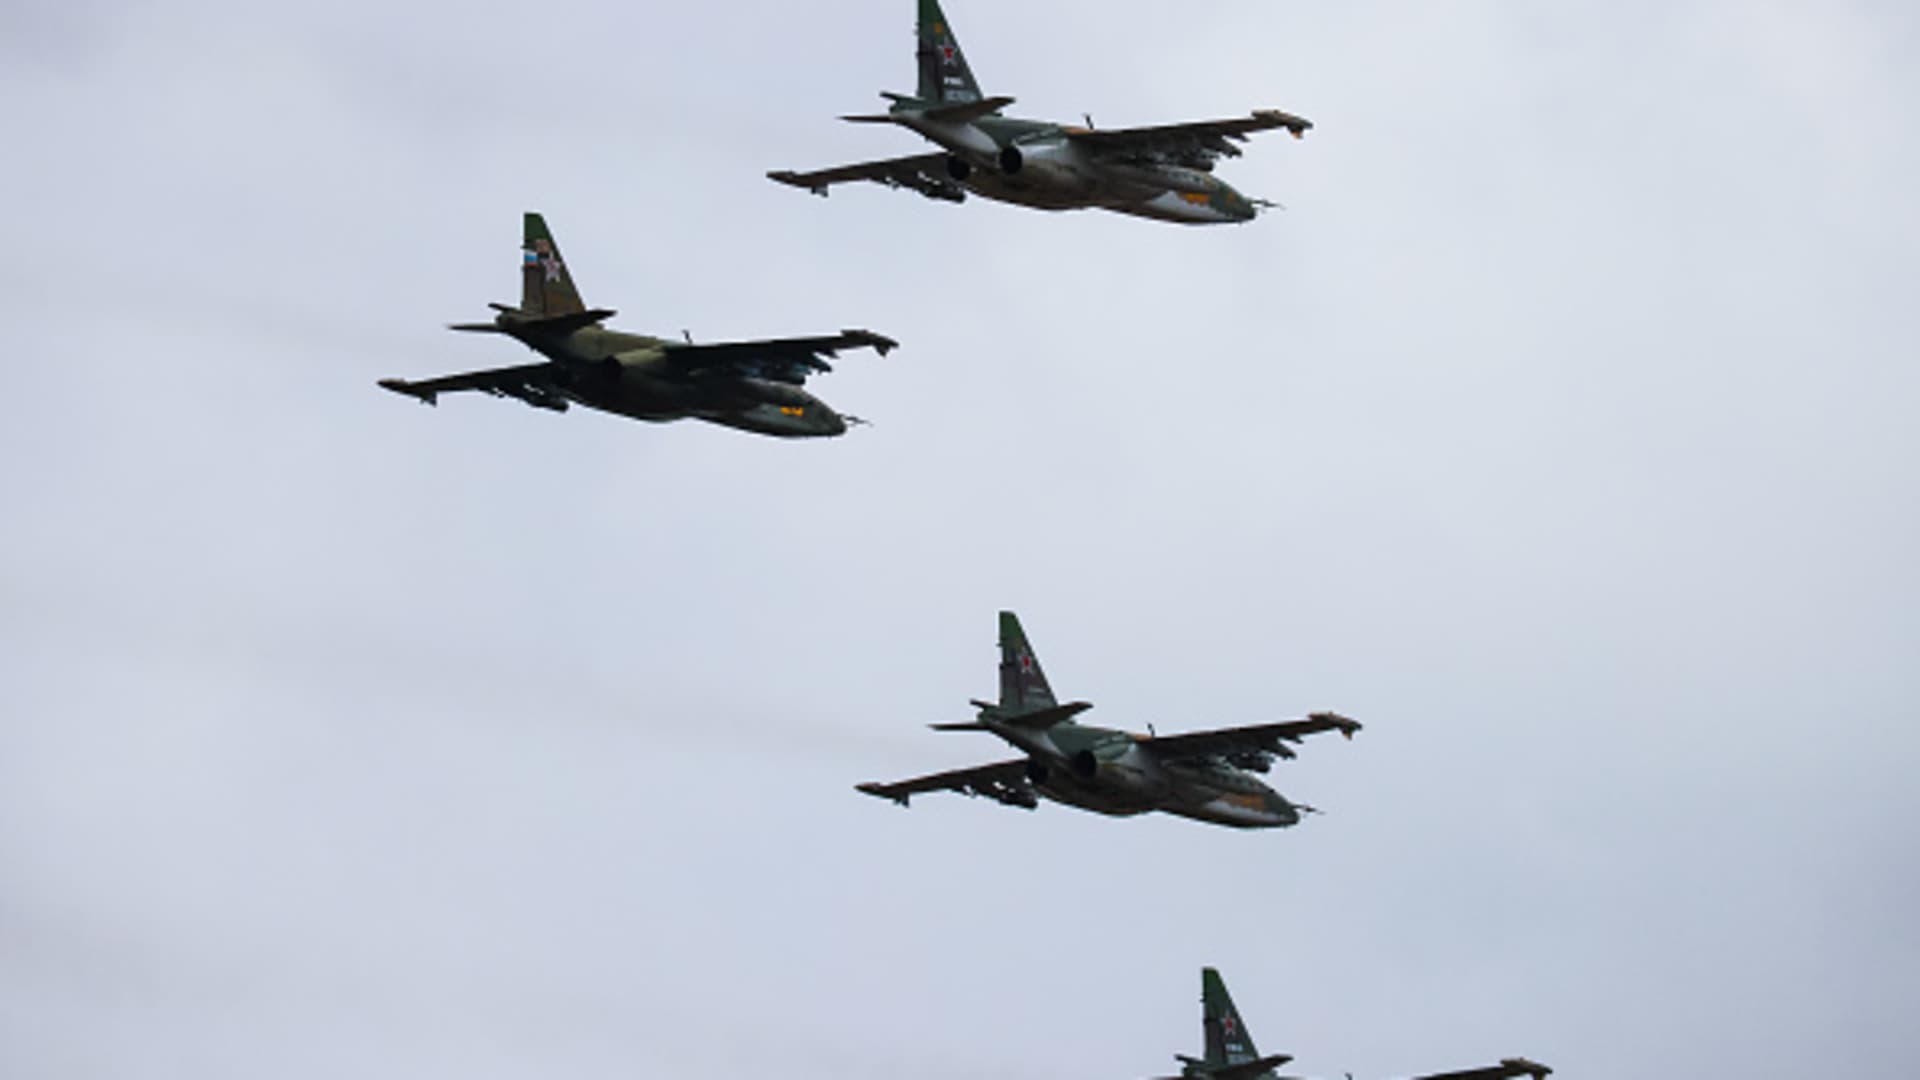 Sukhoi Su-25 fighter jets take part in the Allied Resolve 2022 joint military drills held by Belarusian and Russian troops at the Obuz-Lesnovsky training ground. The military exercise is being held from February 10 to 20 as part of the second phase of testing response forces of the Union State of Russia and Belarus.